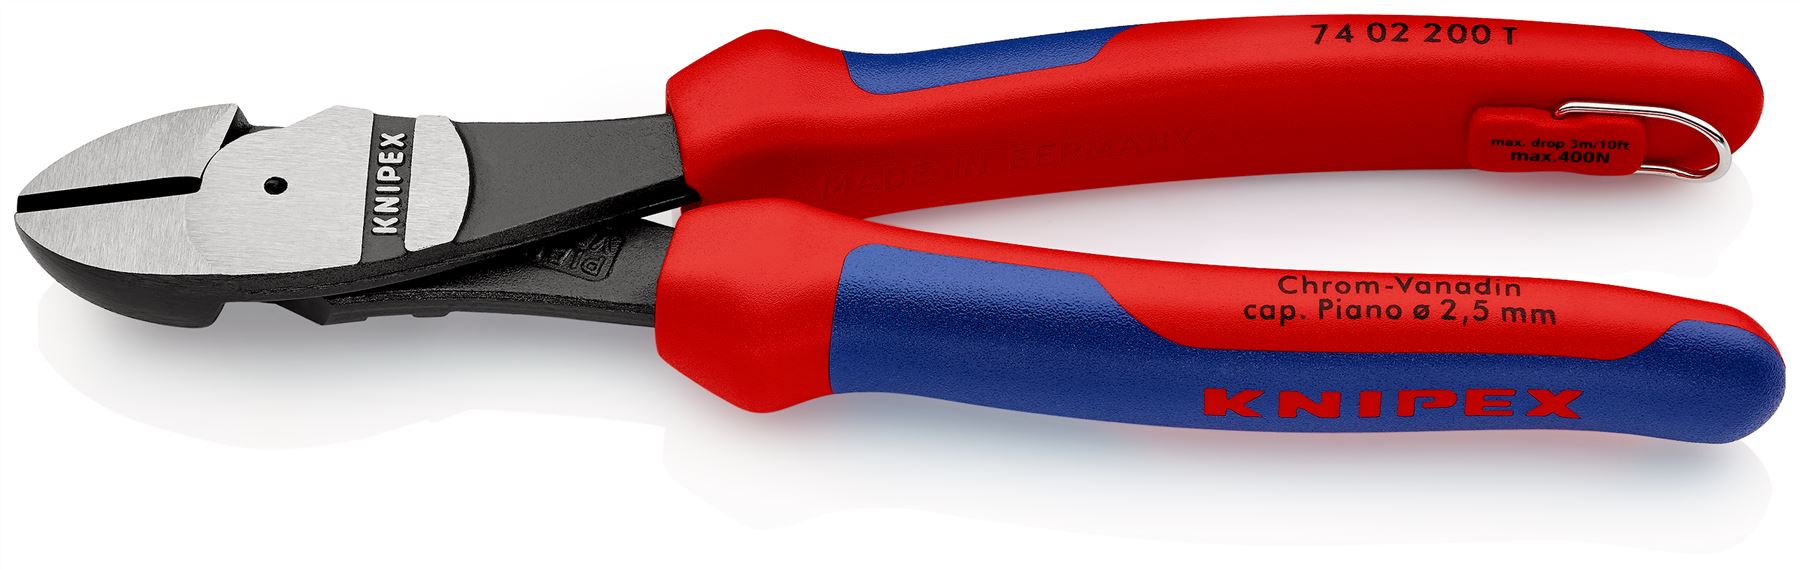 Knipex High Leverage Diagonal Cutter 200mm Multi Component Grips with Tether Point 74 02 200 T